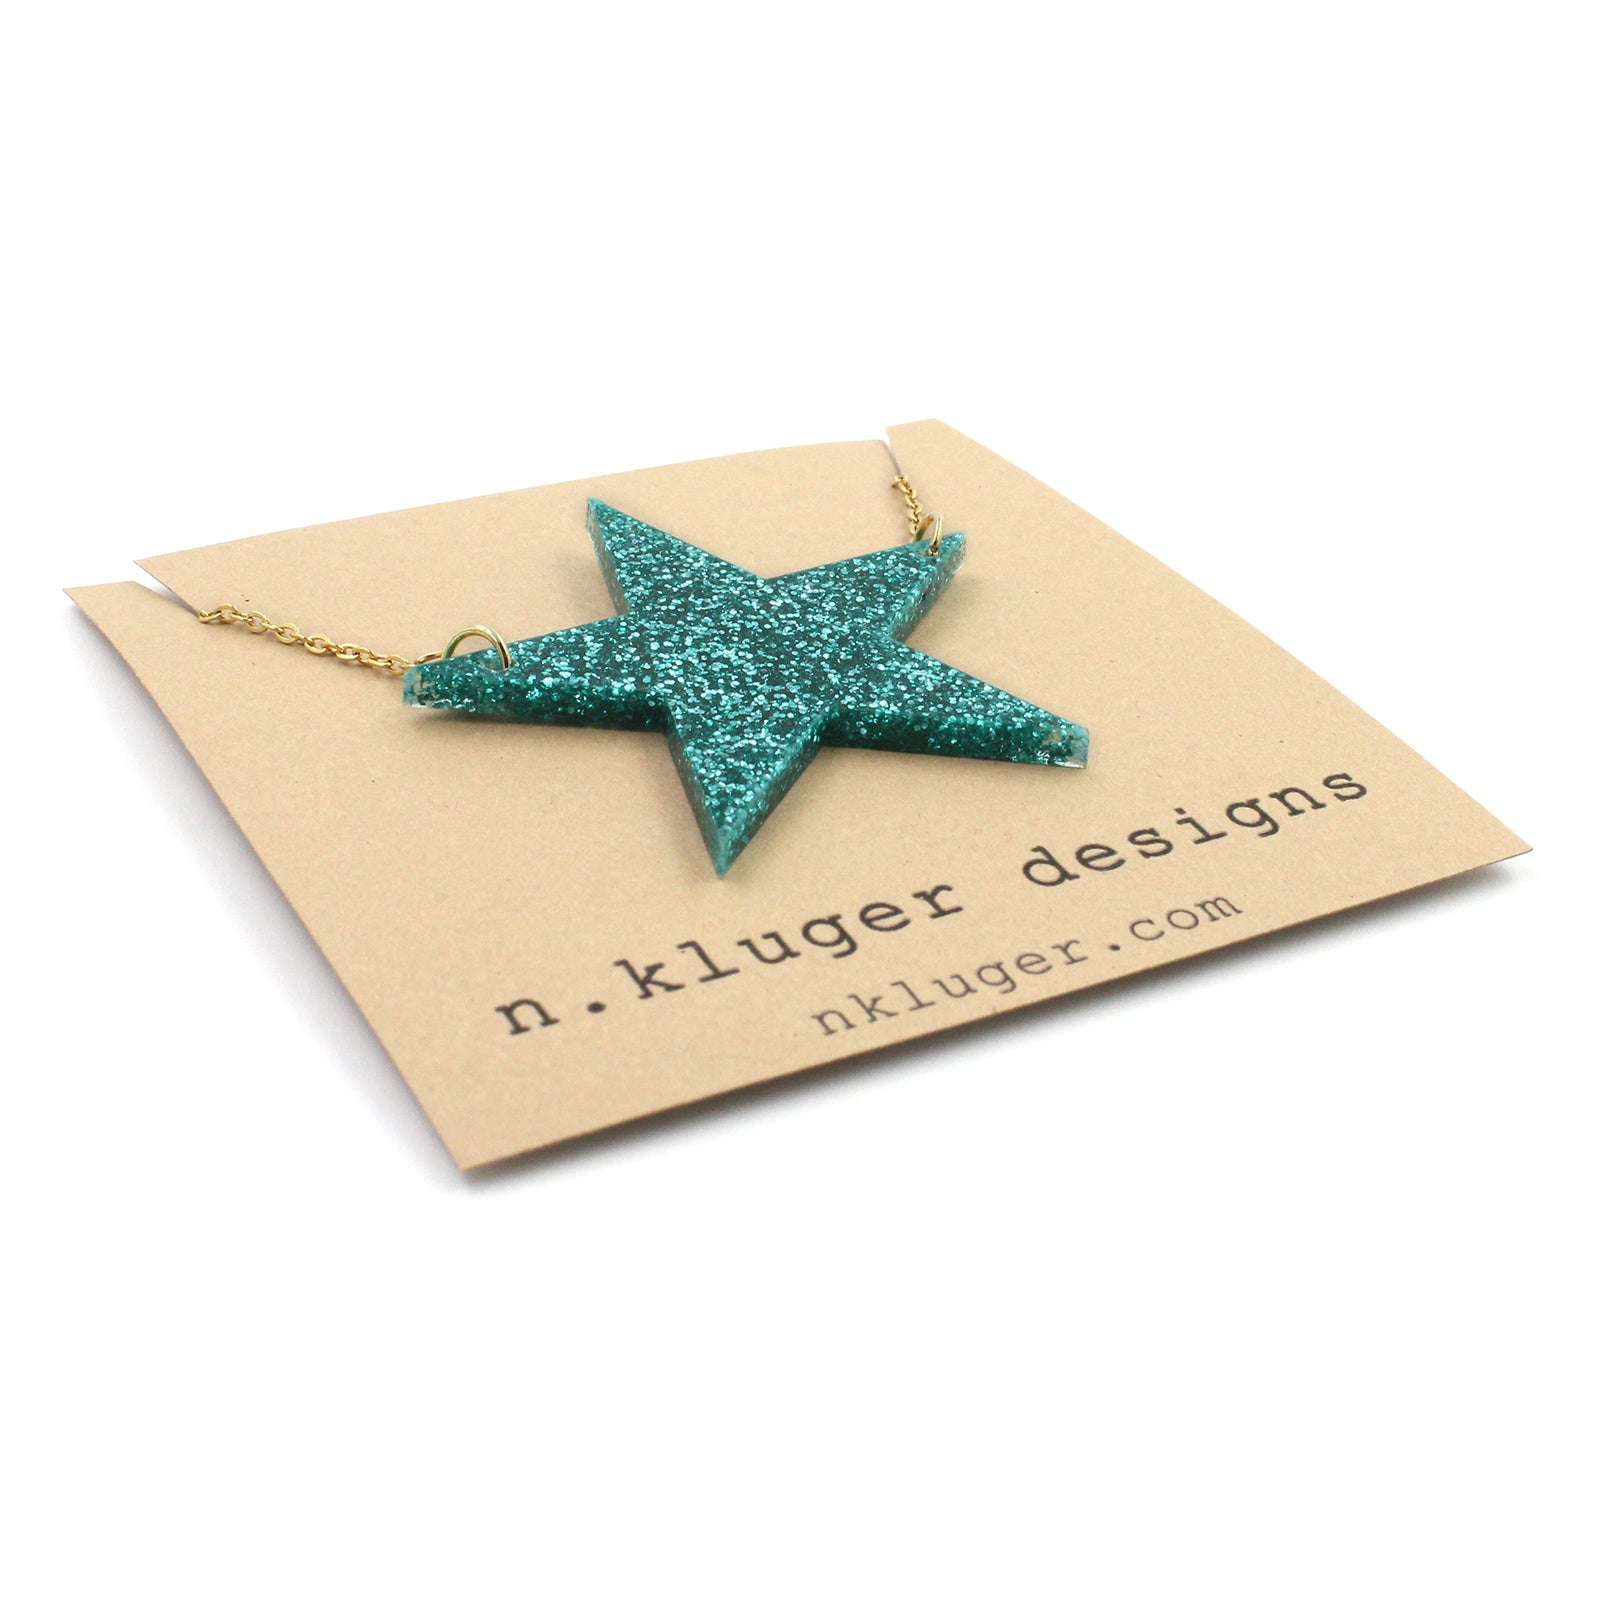 Acrylic Teal Glitter Star Necklace on Gold Chain